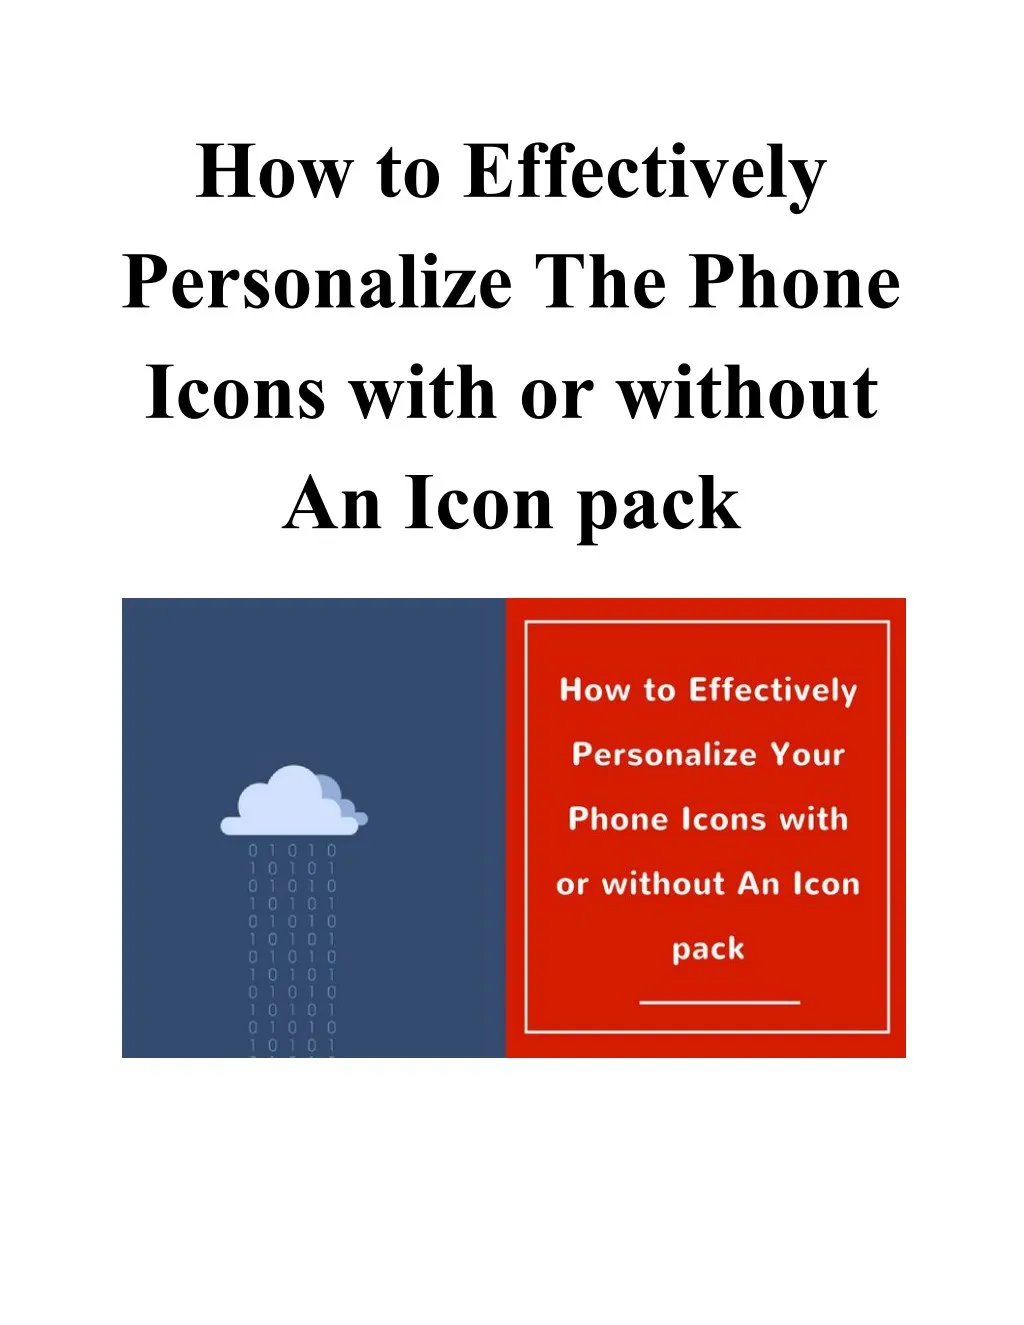 how to effectively personalize the phone icons